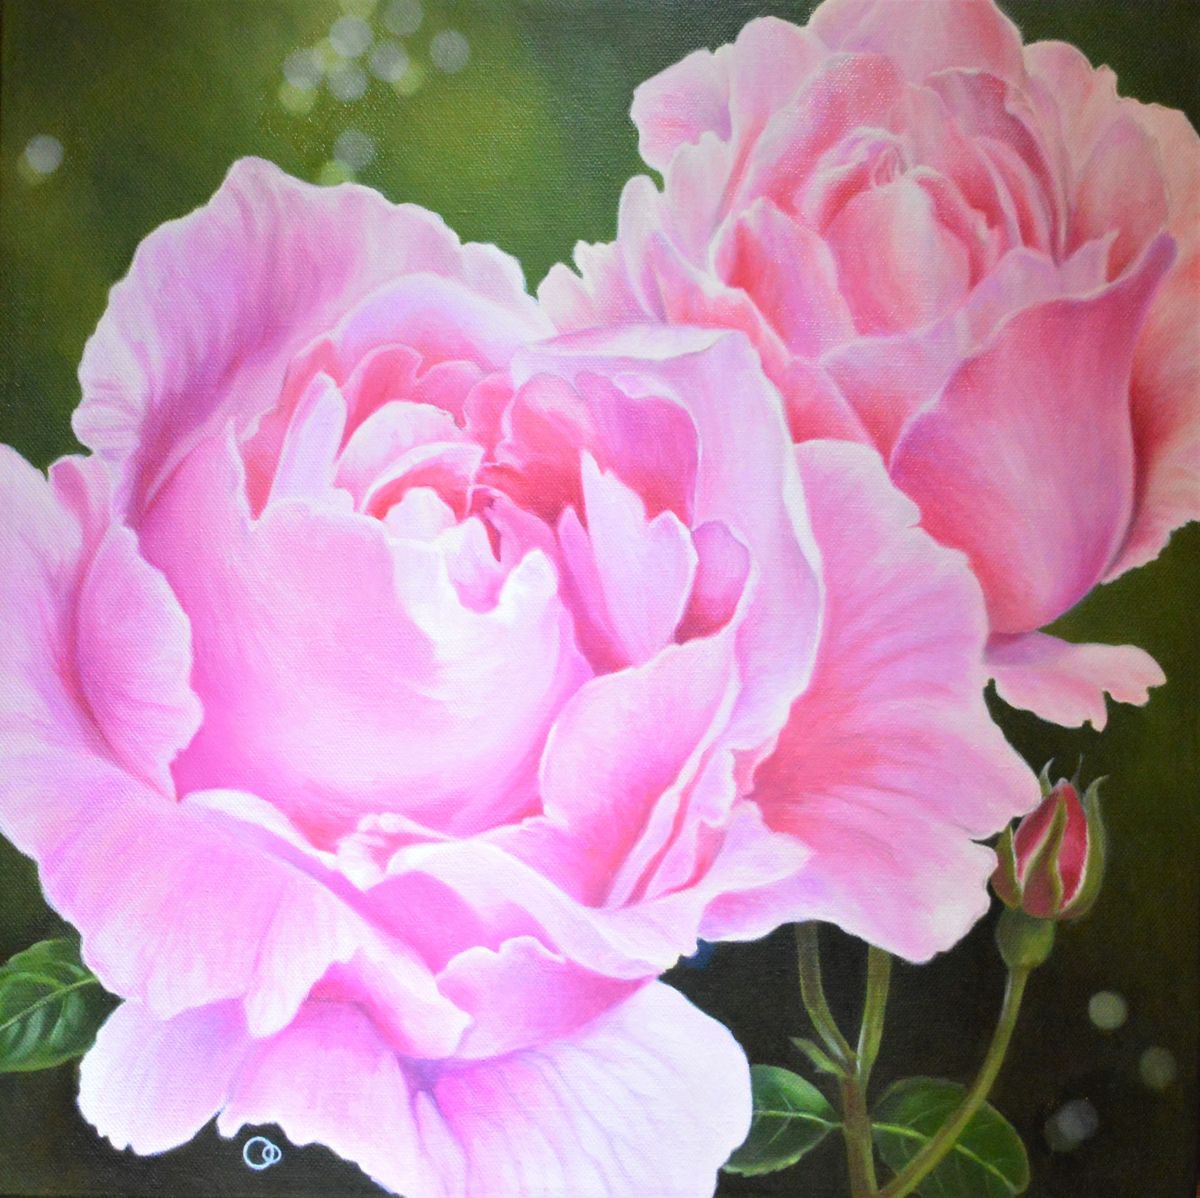 Garden Roses Floral Oil Painting Pink Roses by Veronique Oodian